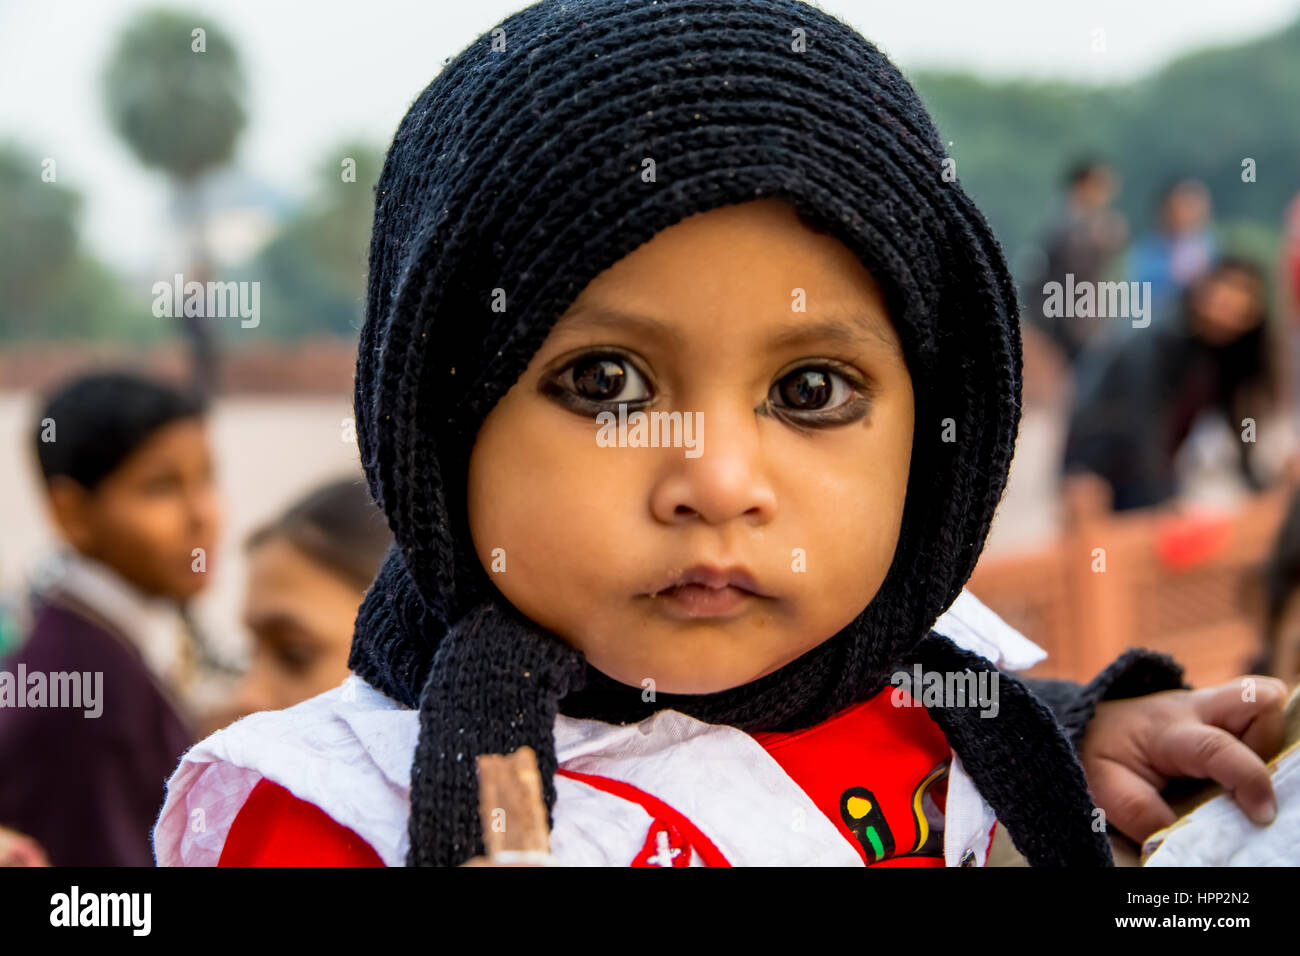 Close Up View Of Baby With Kajal Eyeliner Stock Photo Alamy